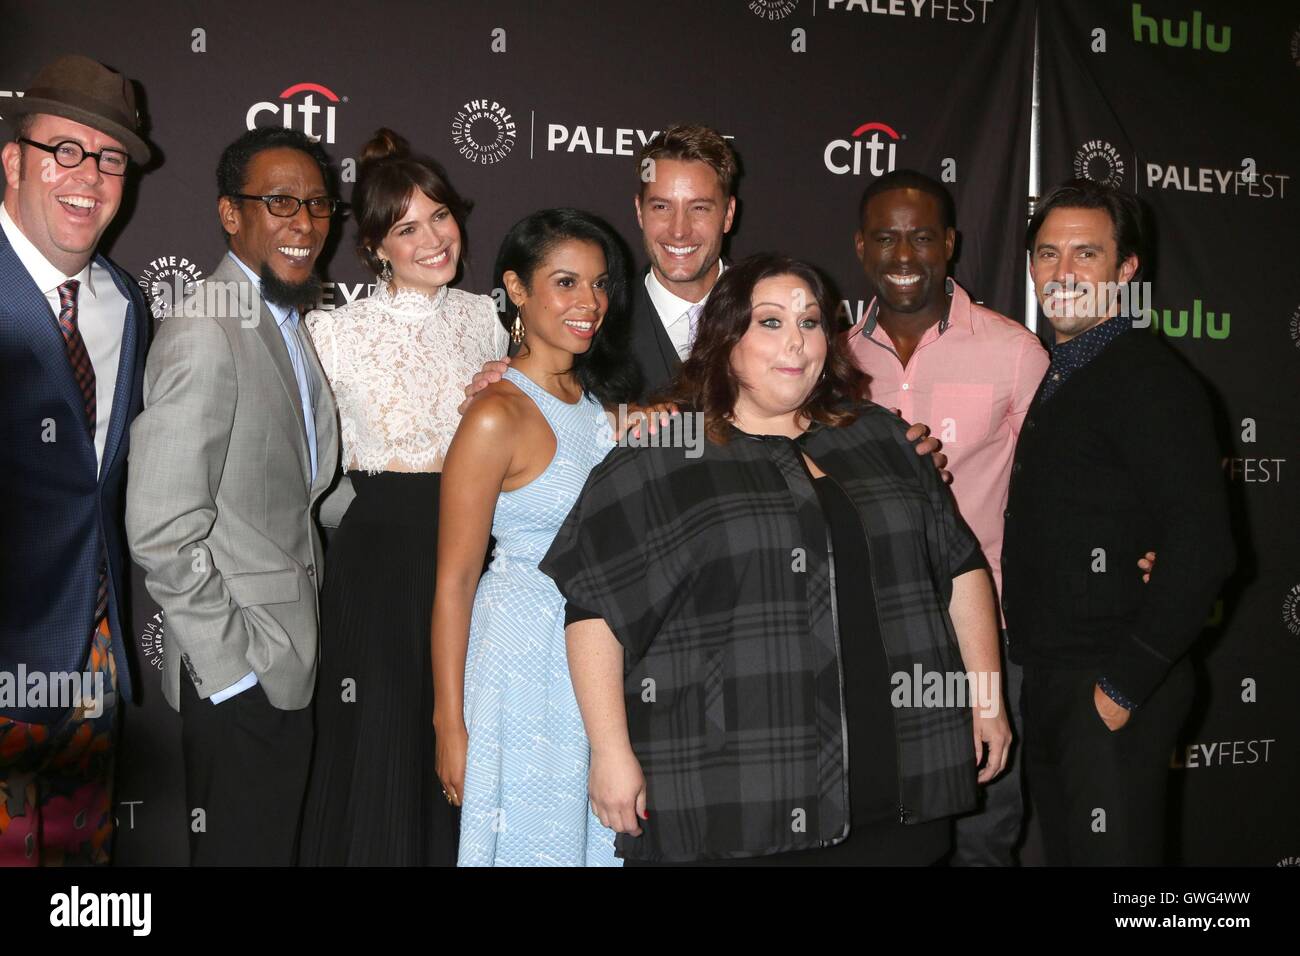 Beverly Hills, CA. 13th Sep, 2016. Chris Sullivan, Ron Cephas Jones, Mandy Moore, Susan Kelechi Watson, Justin Hartley, Chrissy Metz, Sterling K. Brown, Milo Ventimiglia at arrivals for 2016 PaleyFest Fall TV Previews - NBC, The Paley Center for Media, Beverly Hills, CA September 13, 2016. Credit:  Priscilla Grant/Everett Collection/Alamy Live News Stock Photo